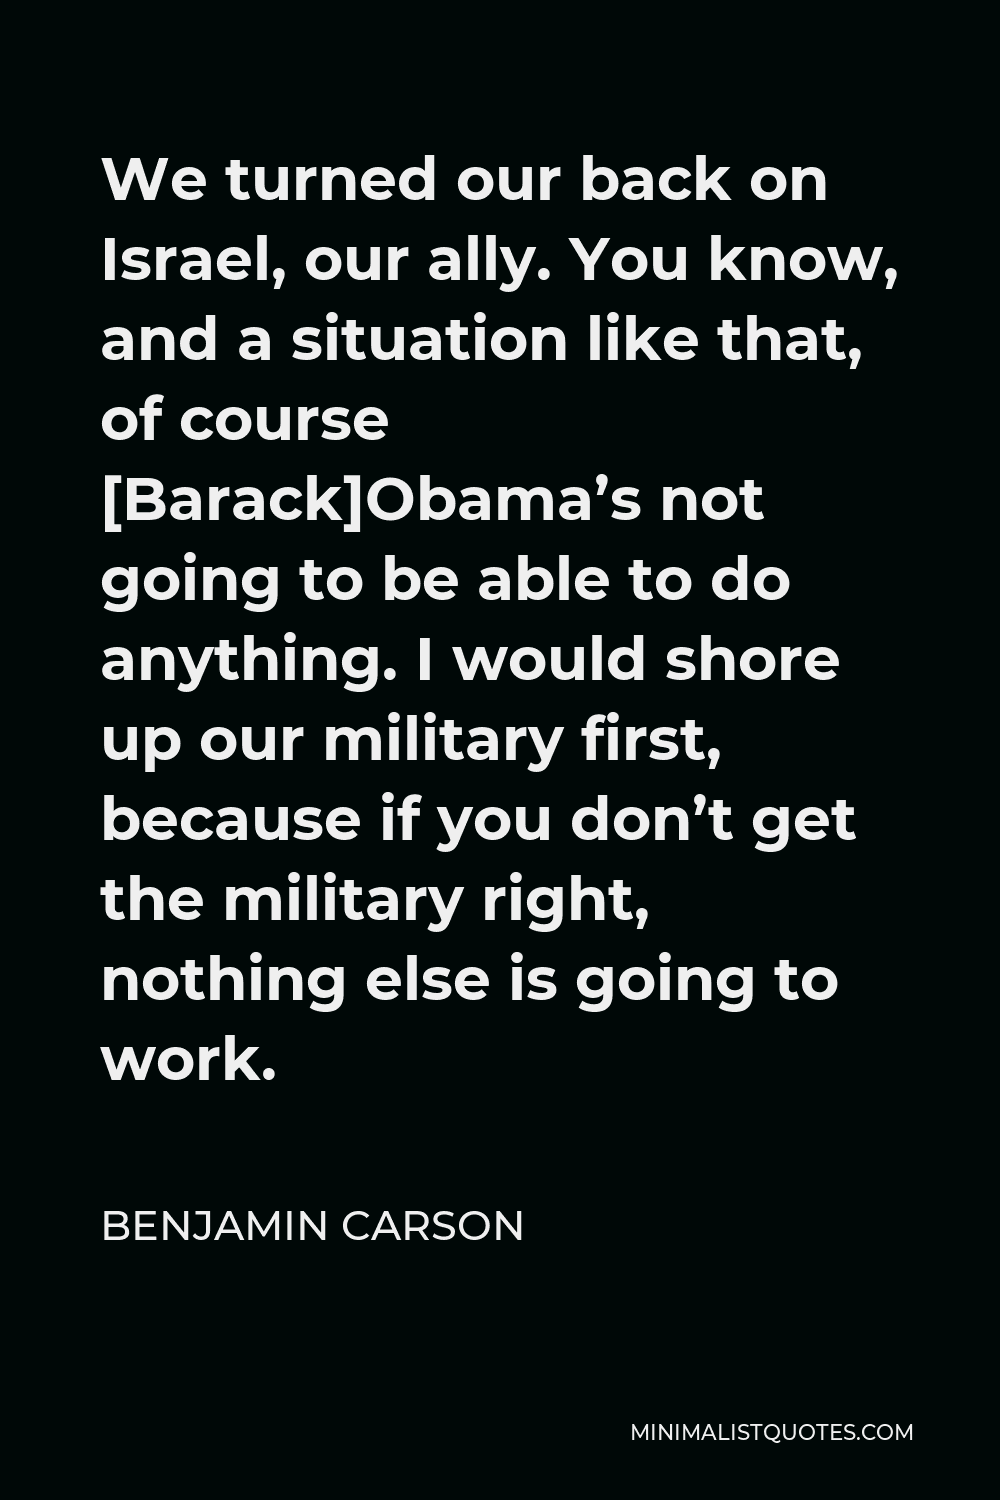 Benjamin Carson Quote - We turned our back on Israel, our ally. You know, and a situation like that, of course [Barack]Obama’s not going to be able to do anything. I would shore up our military first, because if you don’t get the military right, nothing else is going to work.